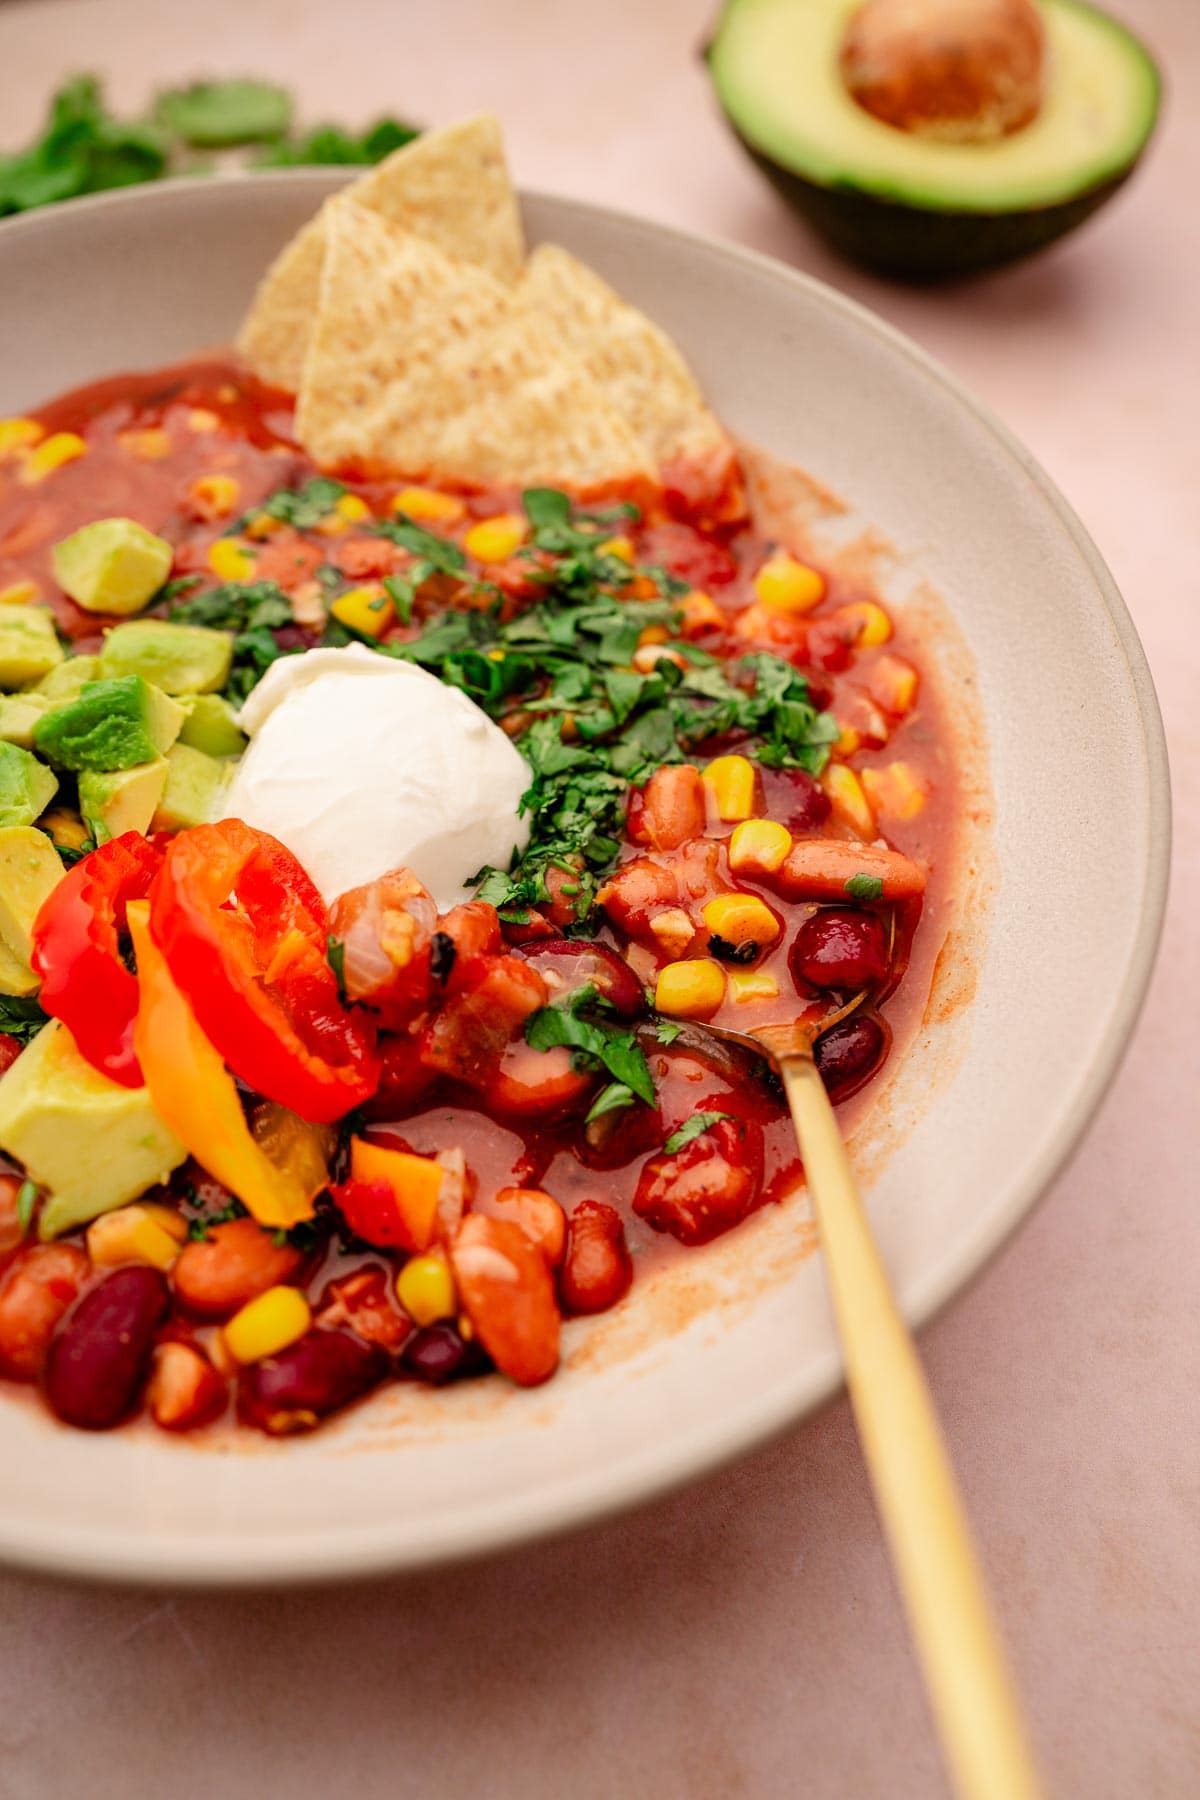 A slow cooker vegetarian chili with bean and vegetable soup, topped with avocado and sour cream.